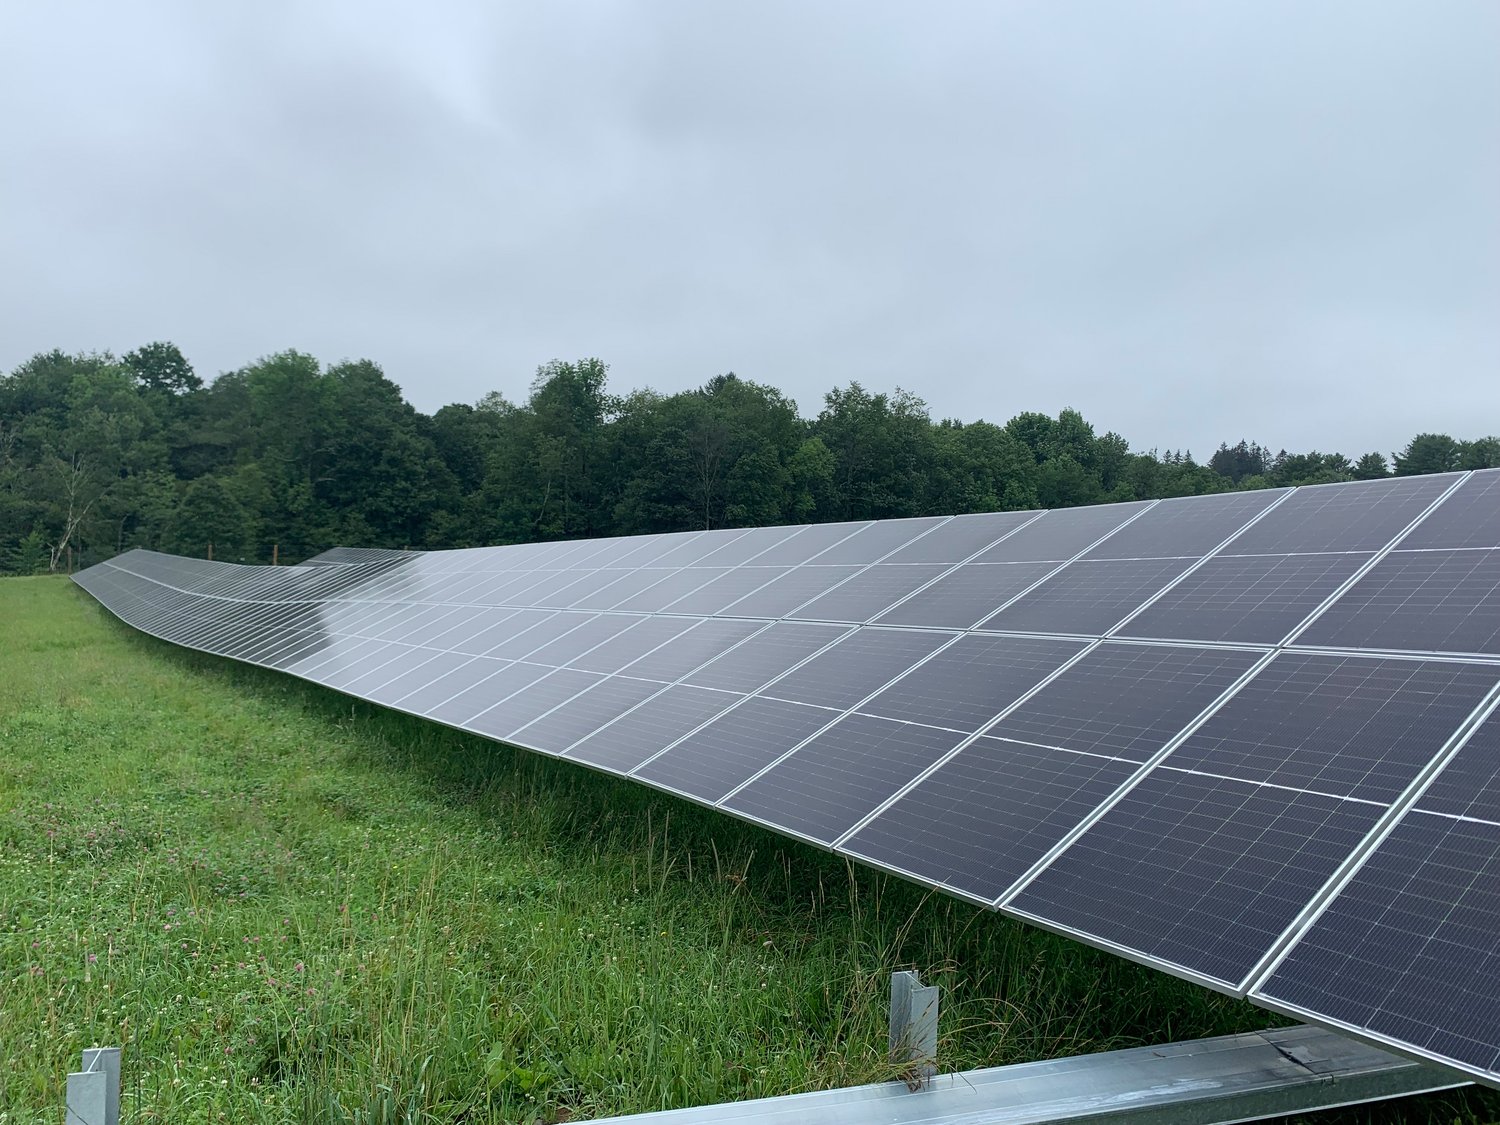 Row upon row of solar panels stretch across farmer Peter Hofstee’s field, providing 6.1 megawatts of solar energy to local residents, businesses and nonprofits.